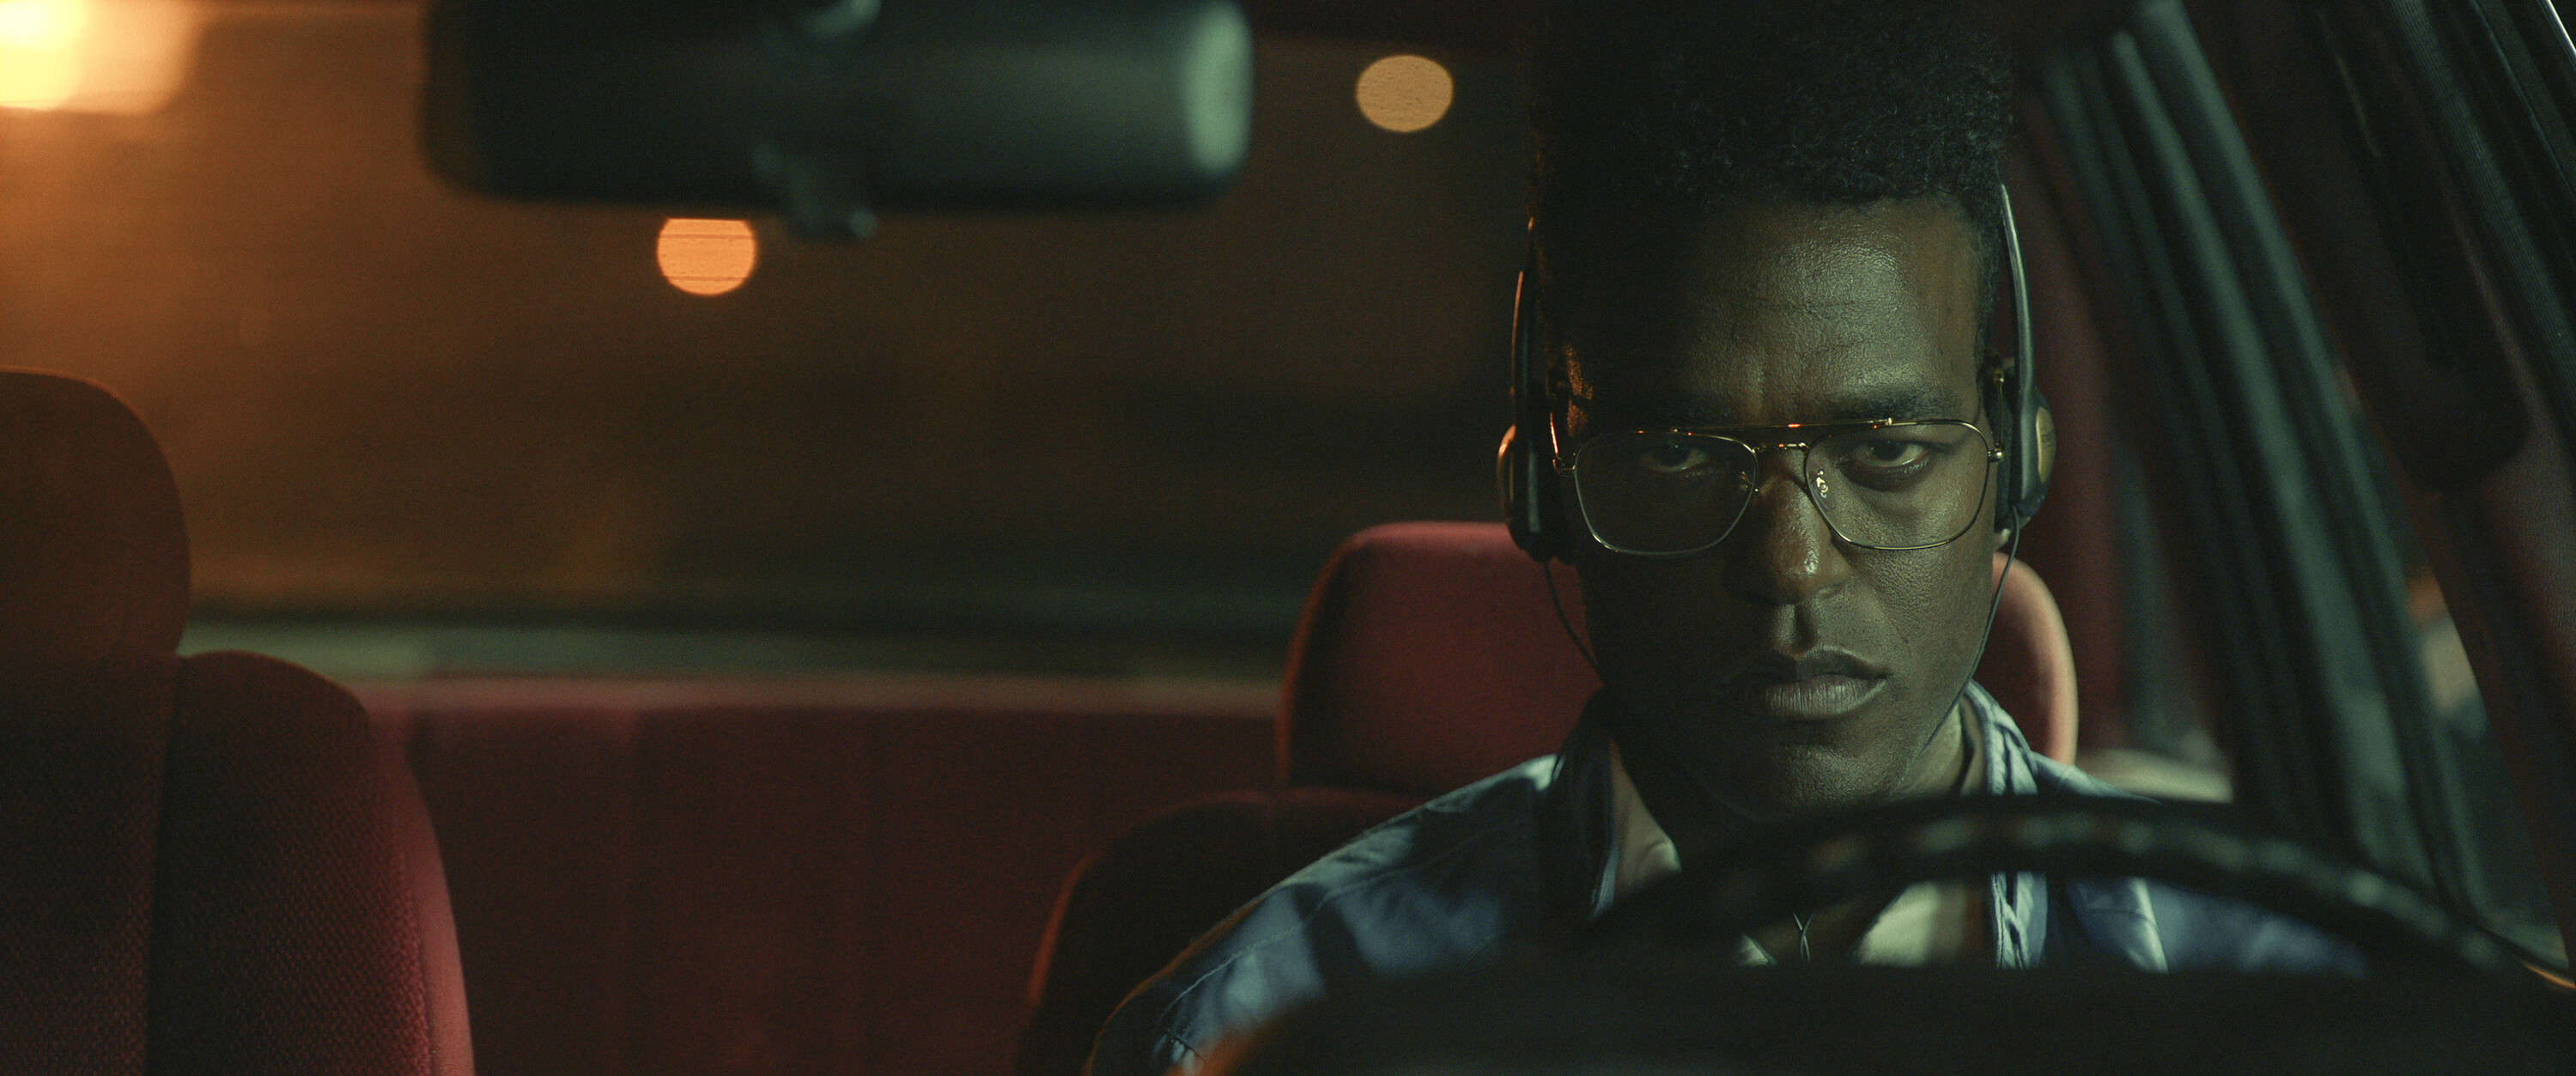 Man with glasses focused on driving at night, intense expression, interior car scene